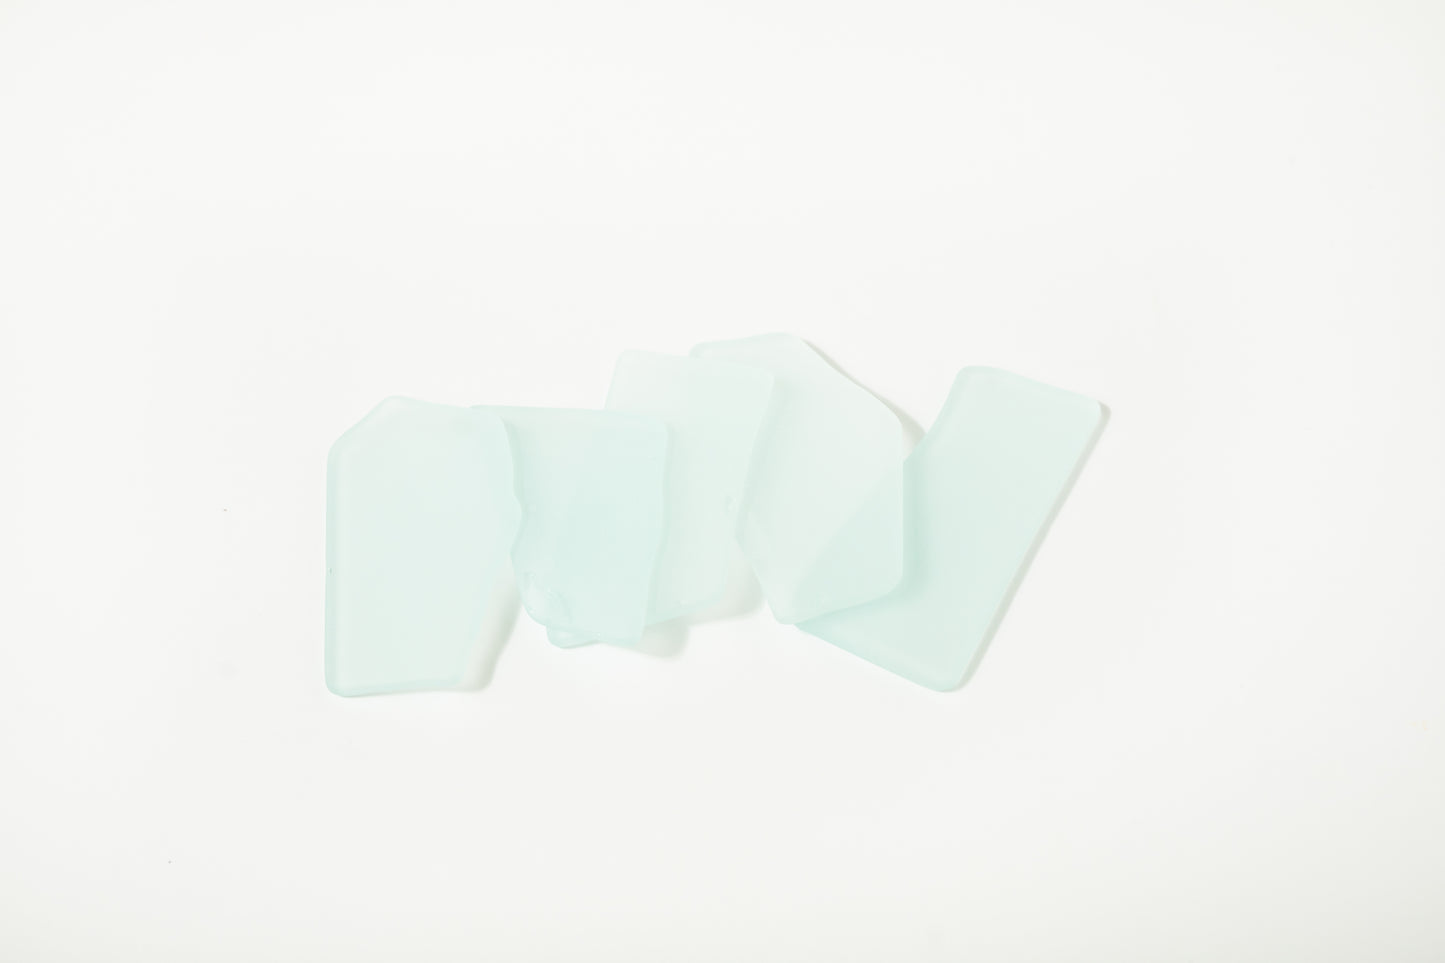 Sea green & teal sea glass place cards - Set of 20 - Irregular shaped pieces